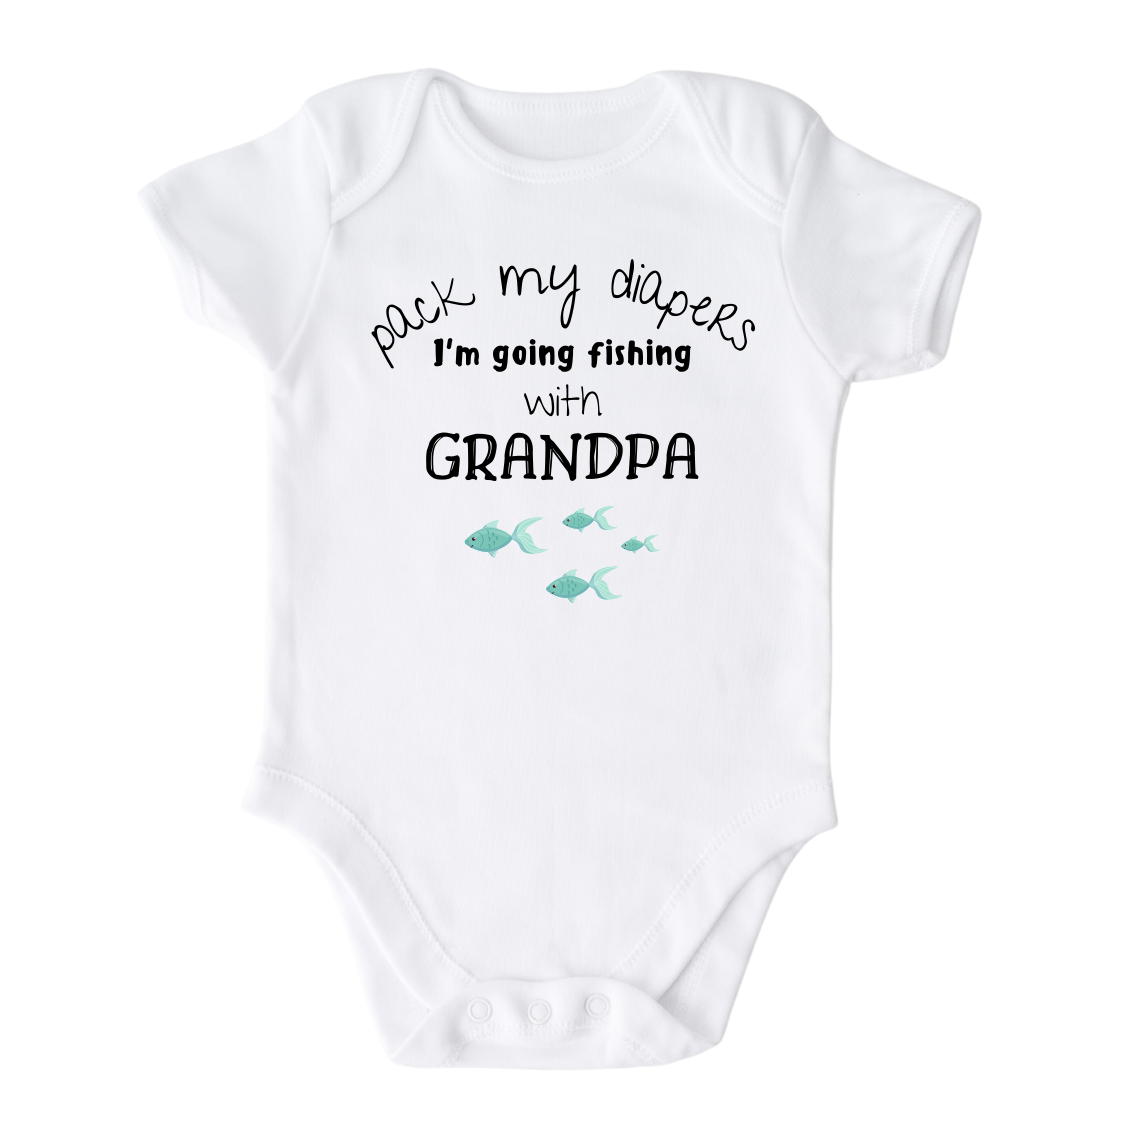 Pack My Diapers I'm Going Fishing with Grandpa Baby Onesie® Cute Baby  Outfit for Baby Gift